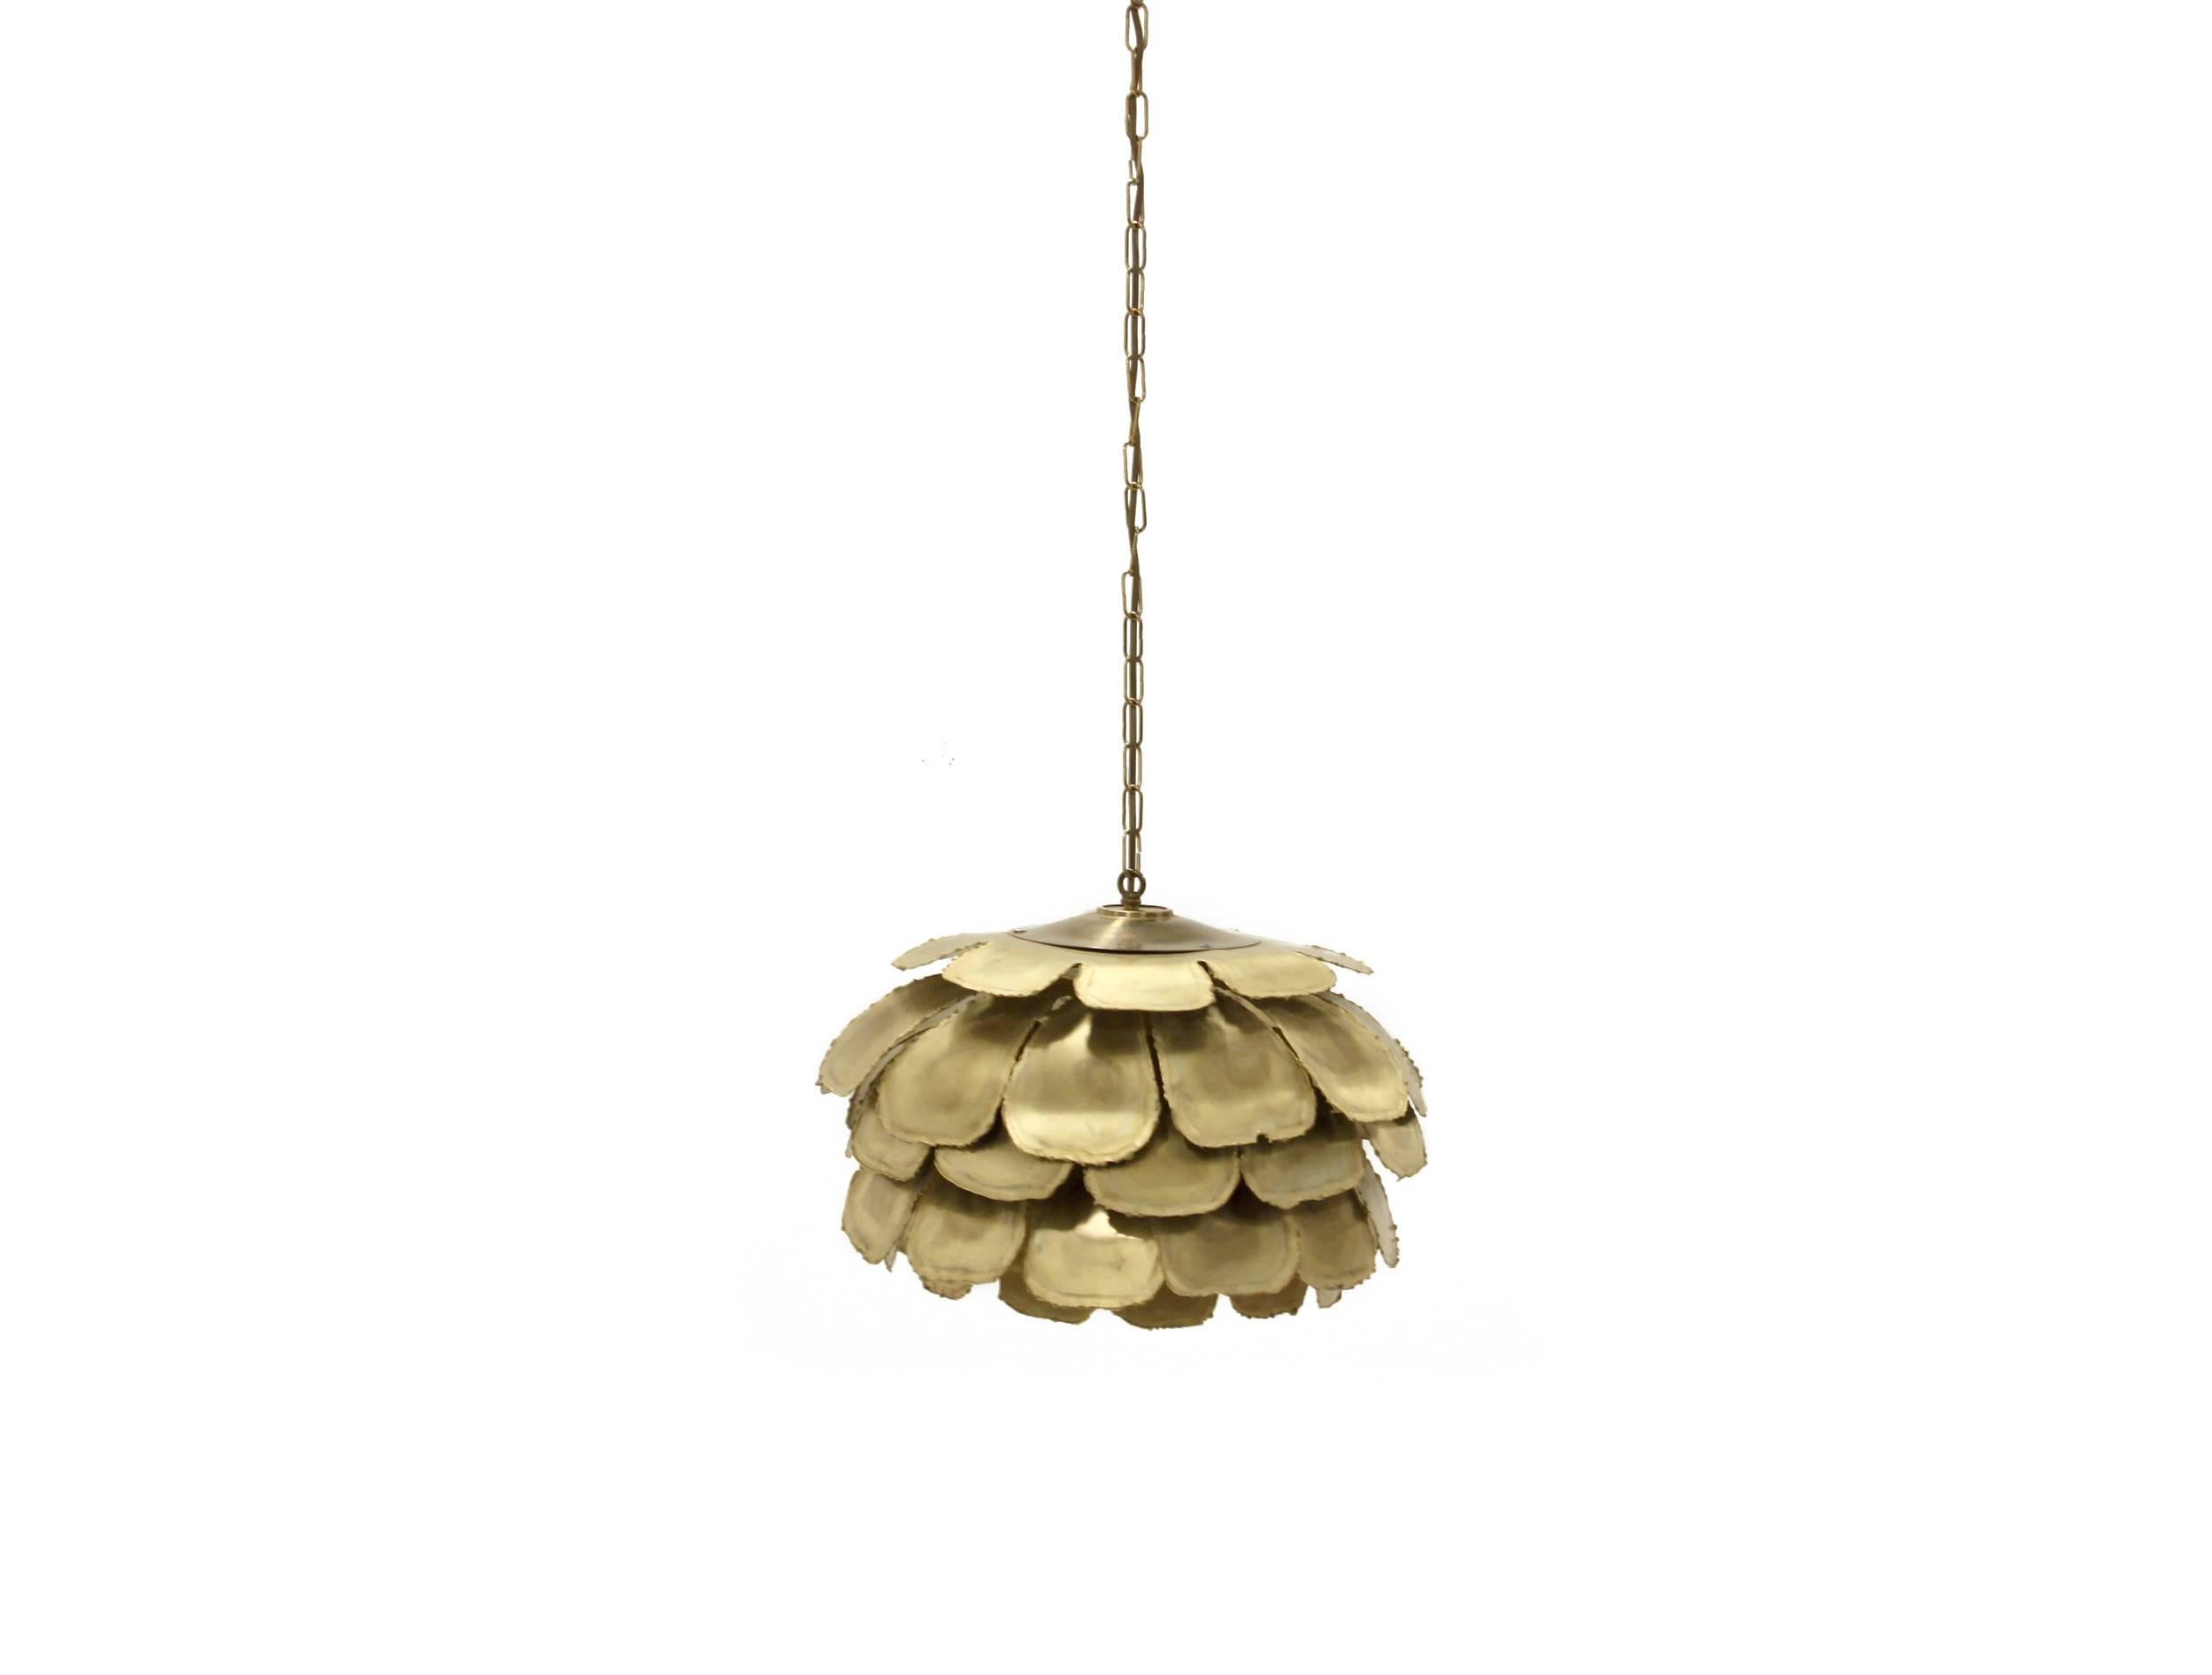 Stunning, well made and high quality ceiling lamp in brass.

Very rare artichoke model, bold and unique in shape and visual expression.

Designed by Svend Aage Holm and made in Denmark by Holm Sørensen from circa 1970s second half. 

The light